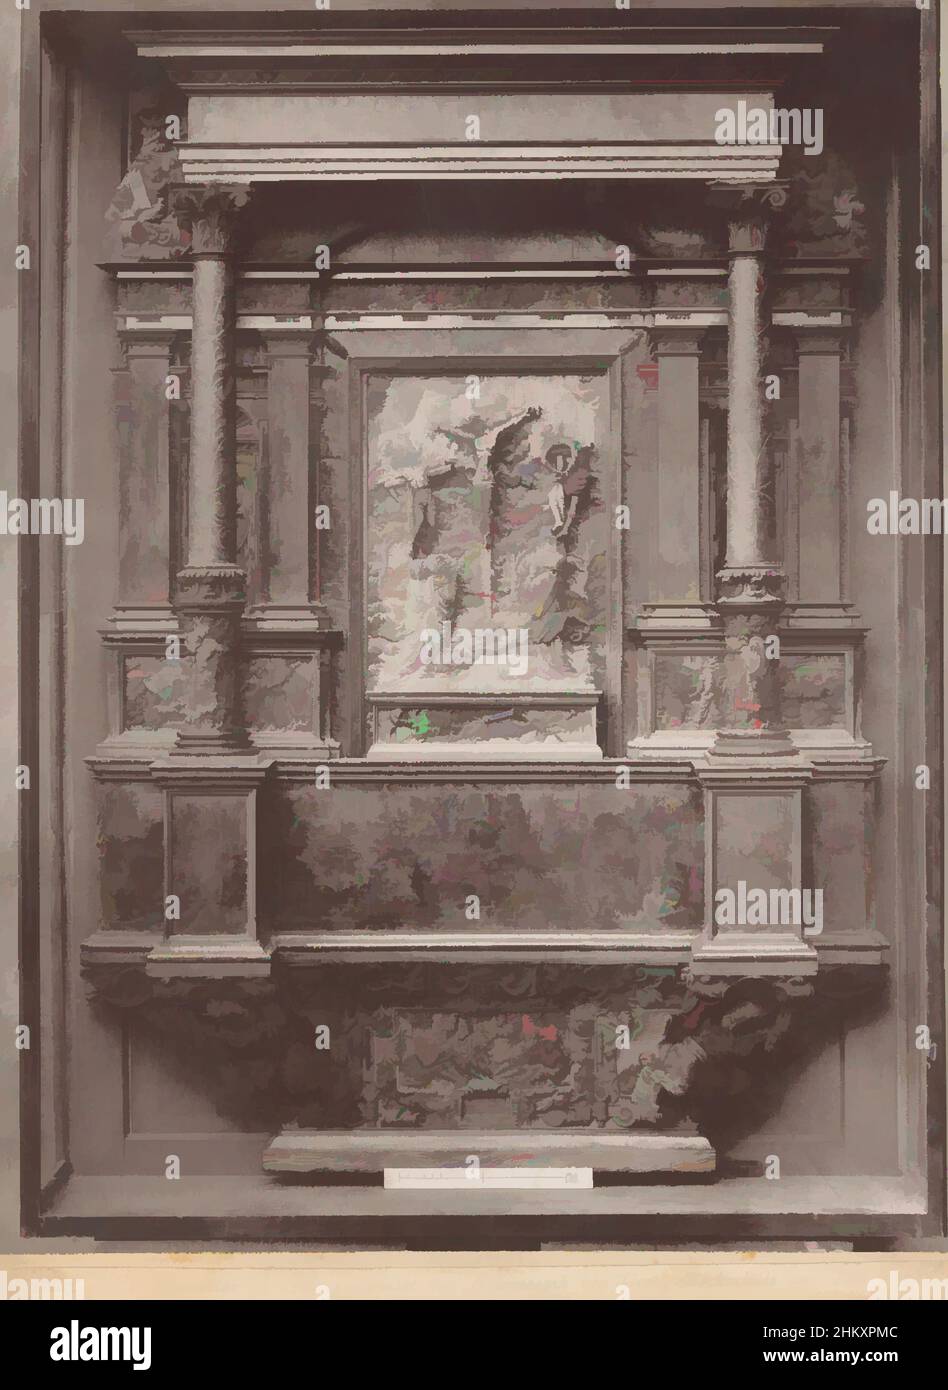 Art inspired by Wooden house altar at Tölz, Hausaltar in Holz geschnitzt mit Holzmosaik von Georg Bockschütz aus Tölz, Bad Tölz, in or after 1875 - c. 1900, cardboard, collotype, height 257 mm × width 194 mm, Classic works modernized by Artotop with a splash of modernity. Shapes, color and value, eye-catching visual impact on art. Emotions through freedom of artworks in a contemporary way. A timeless message pursuing a wildly creative new direction. Artists turning to the digital medium and creating the Artotop NFT Stock Photo